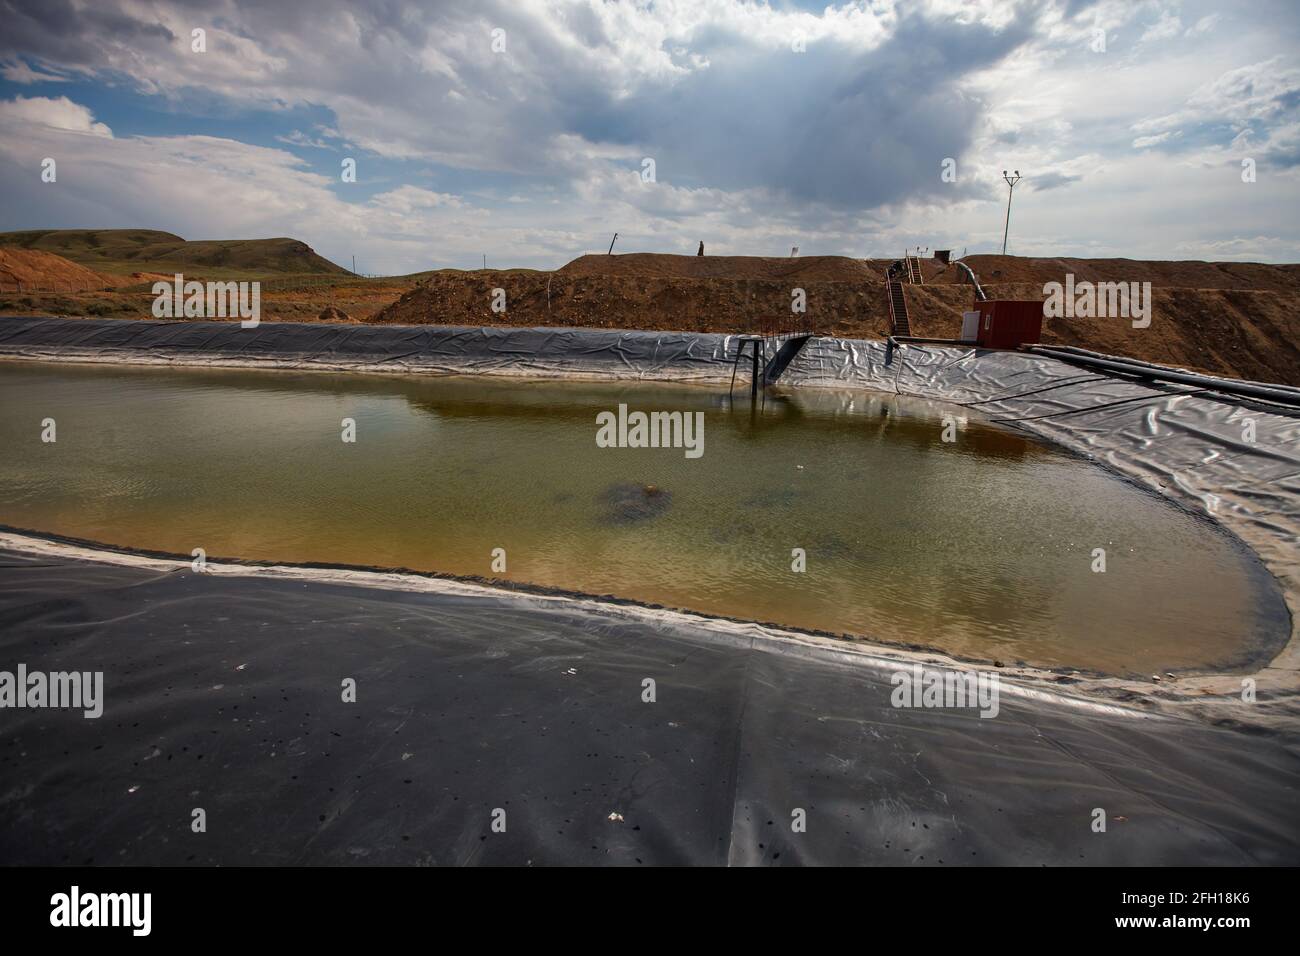 Almaty region, Kazakhstan: Extraction of gold ore. Mining and processing plant. Pond for chemical refining by sodium cyanide. Stock Photo